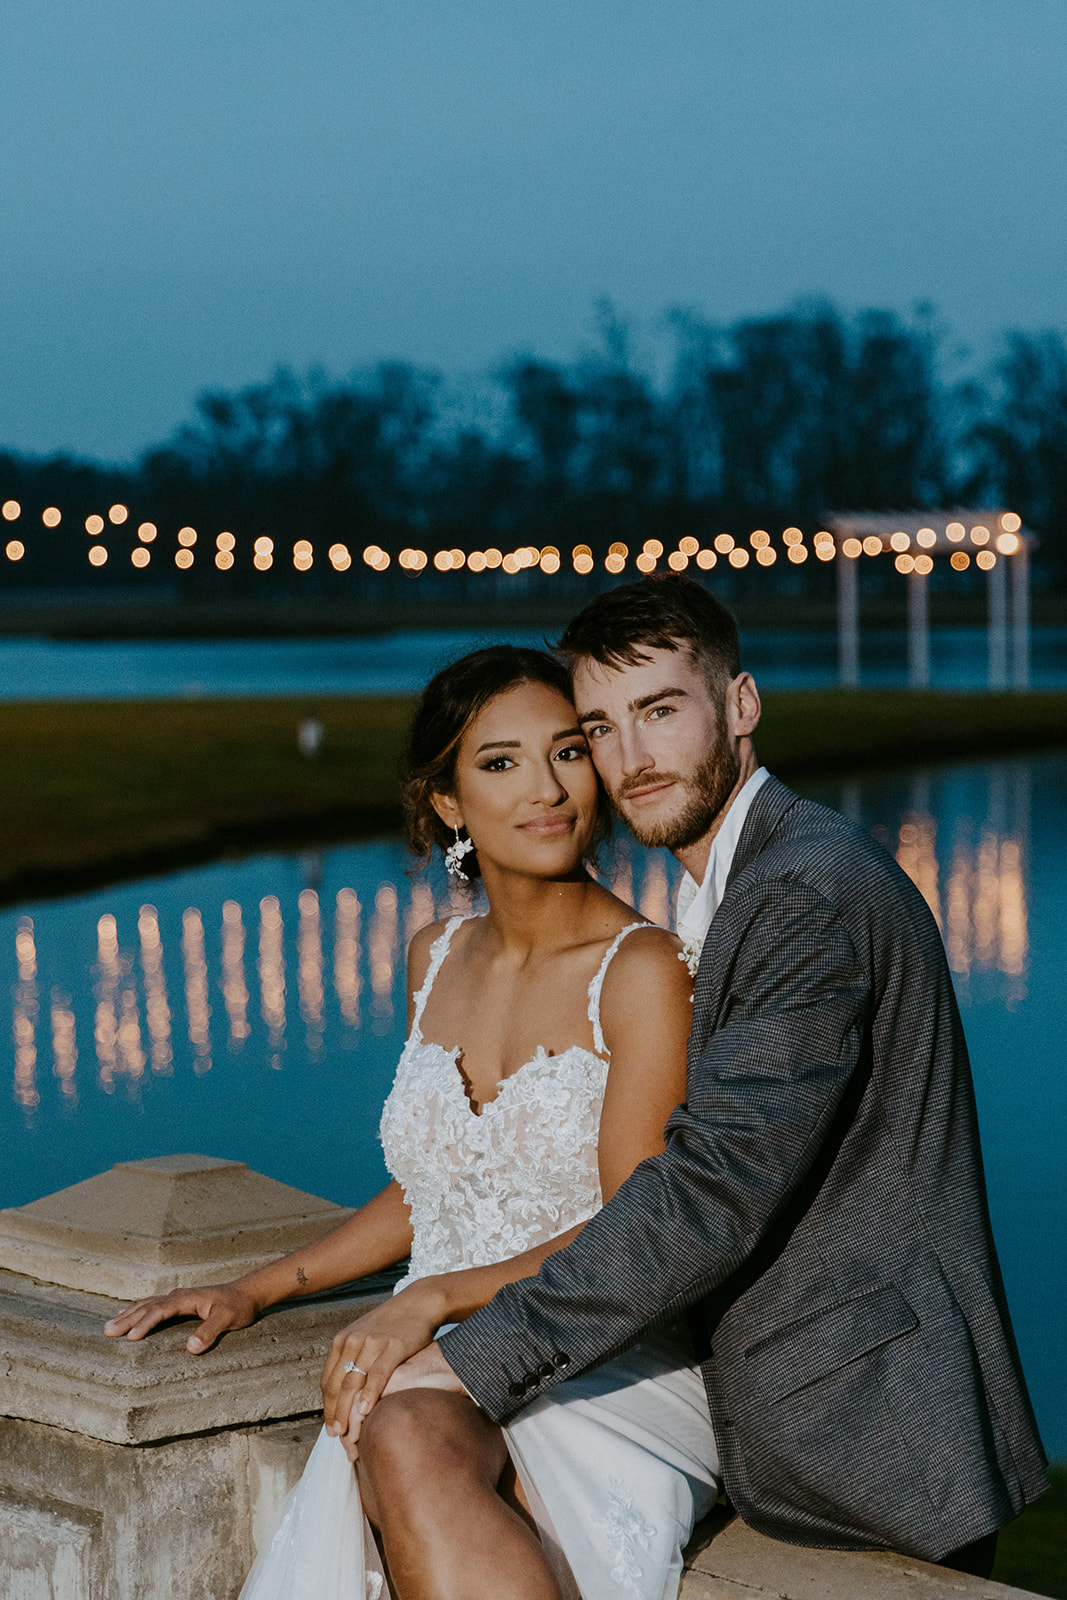 A newlywed couple poses at dusk, the woman in a white dress, the man in a gray suit, with a serene lake and string lights in the background.